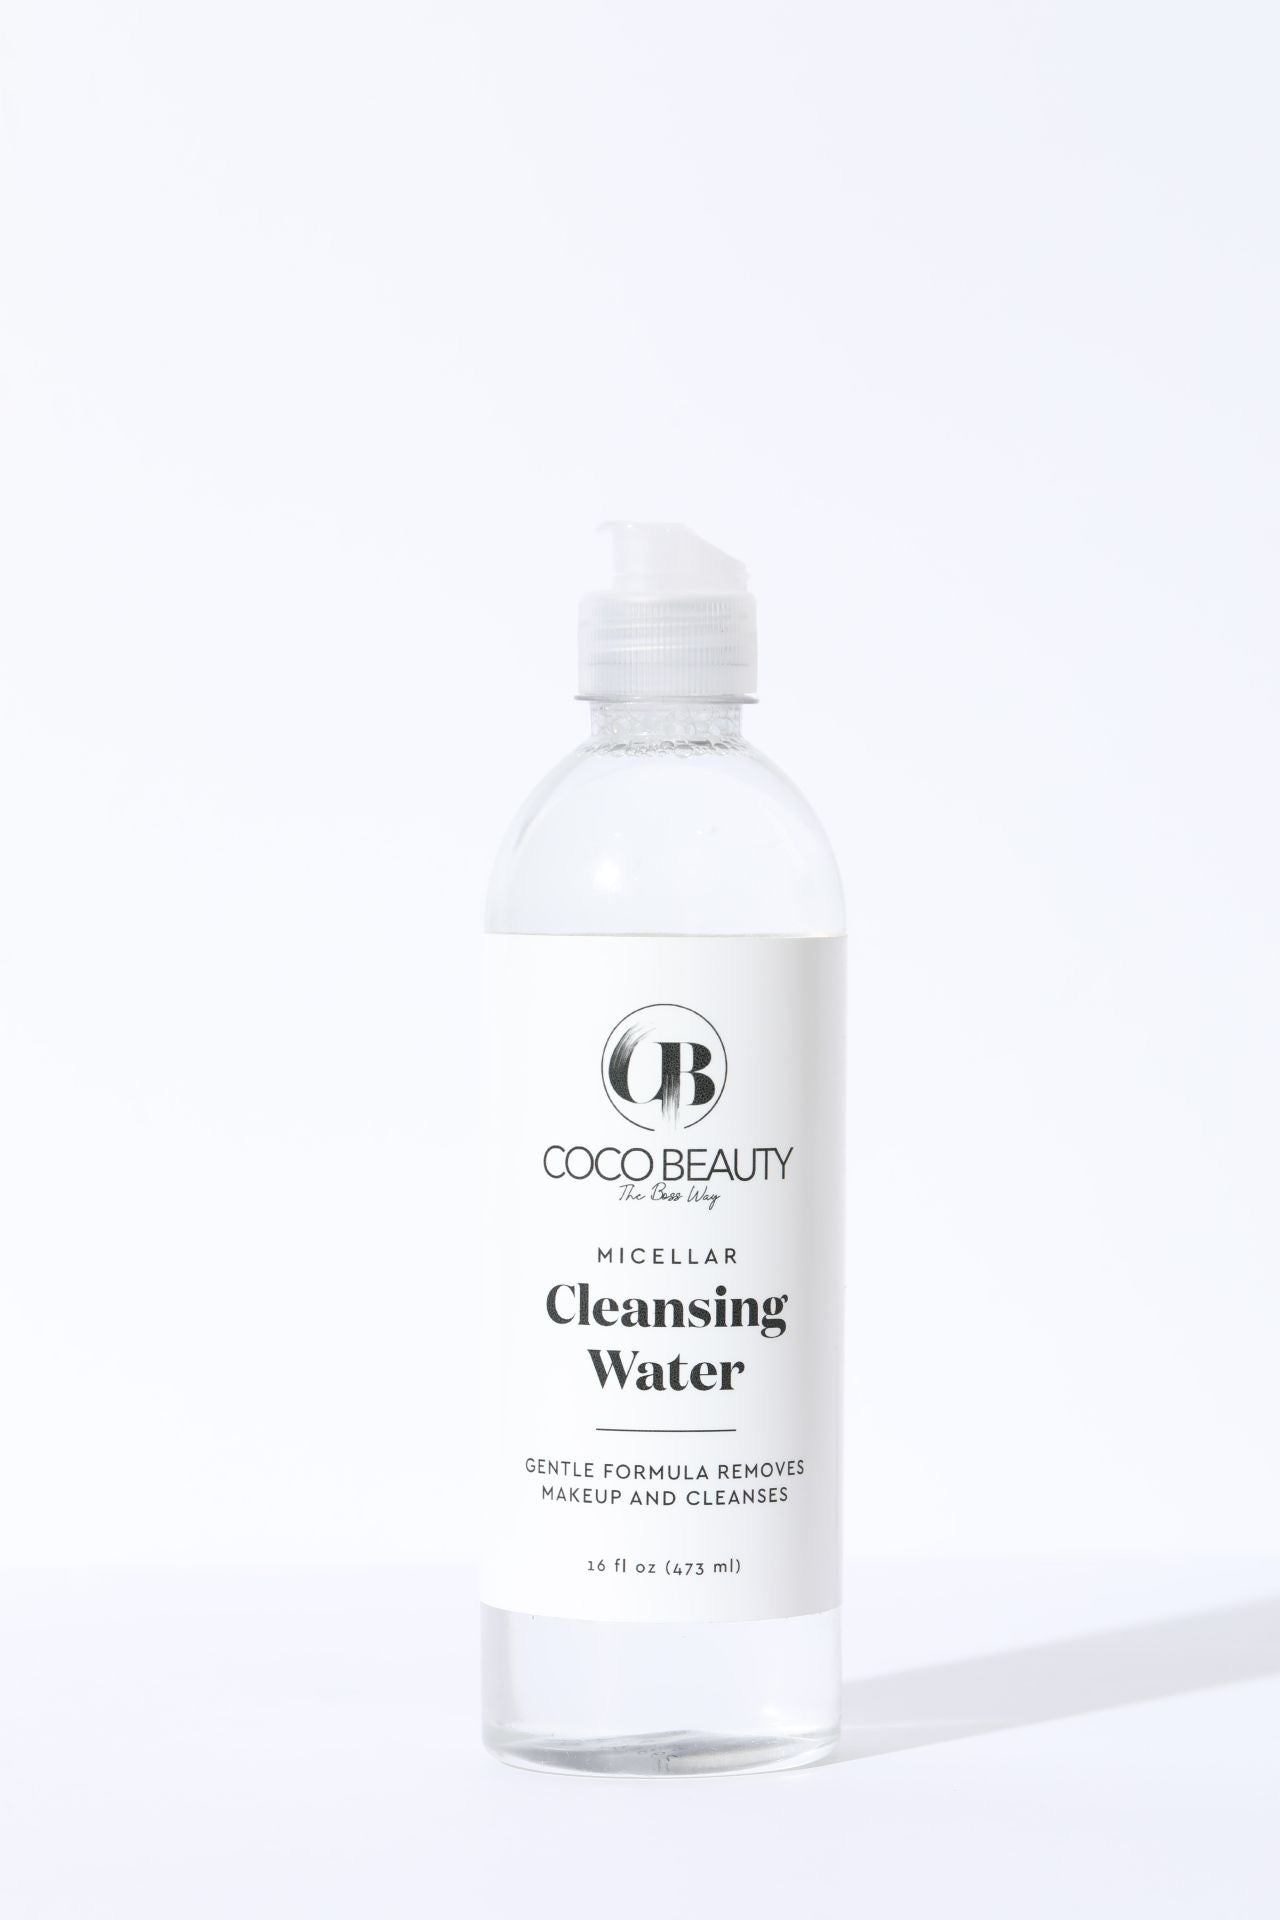 Coco cleansing water